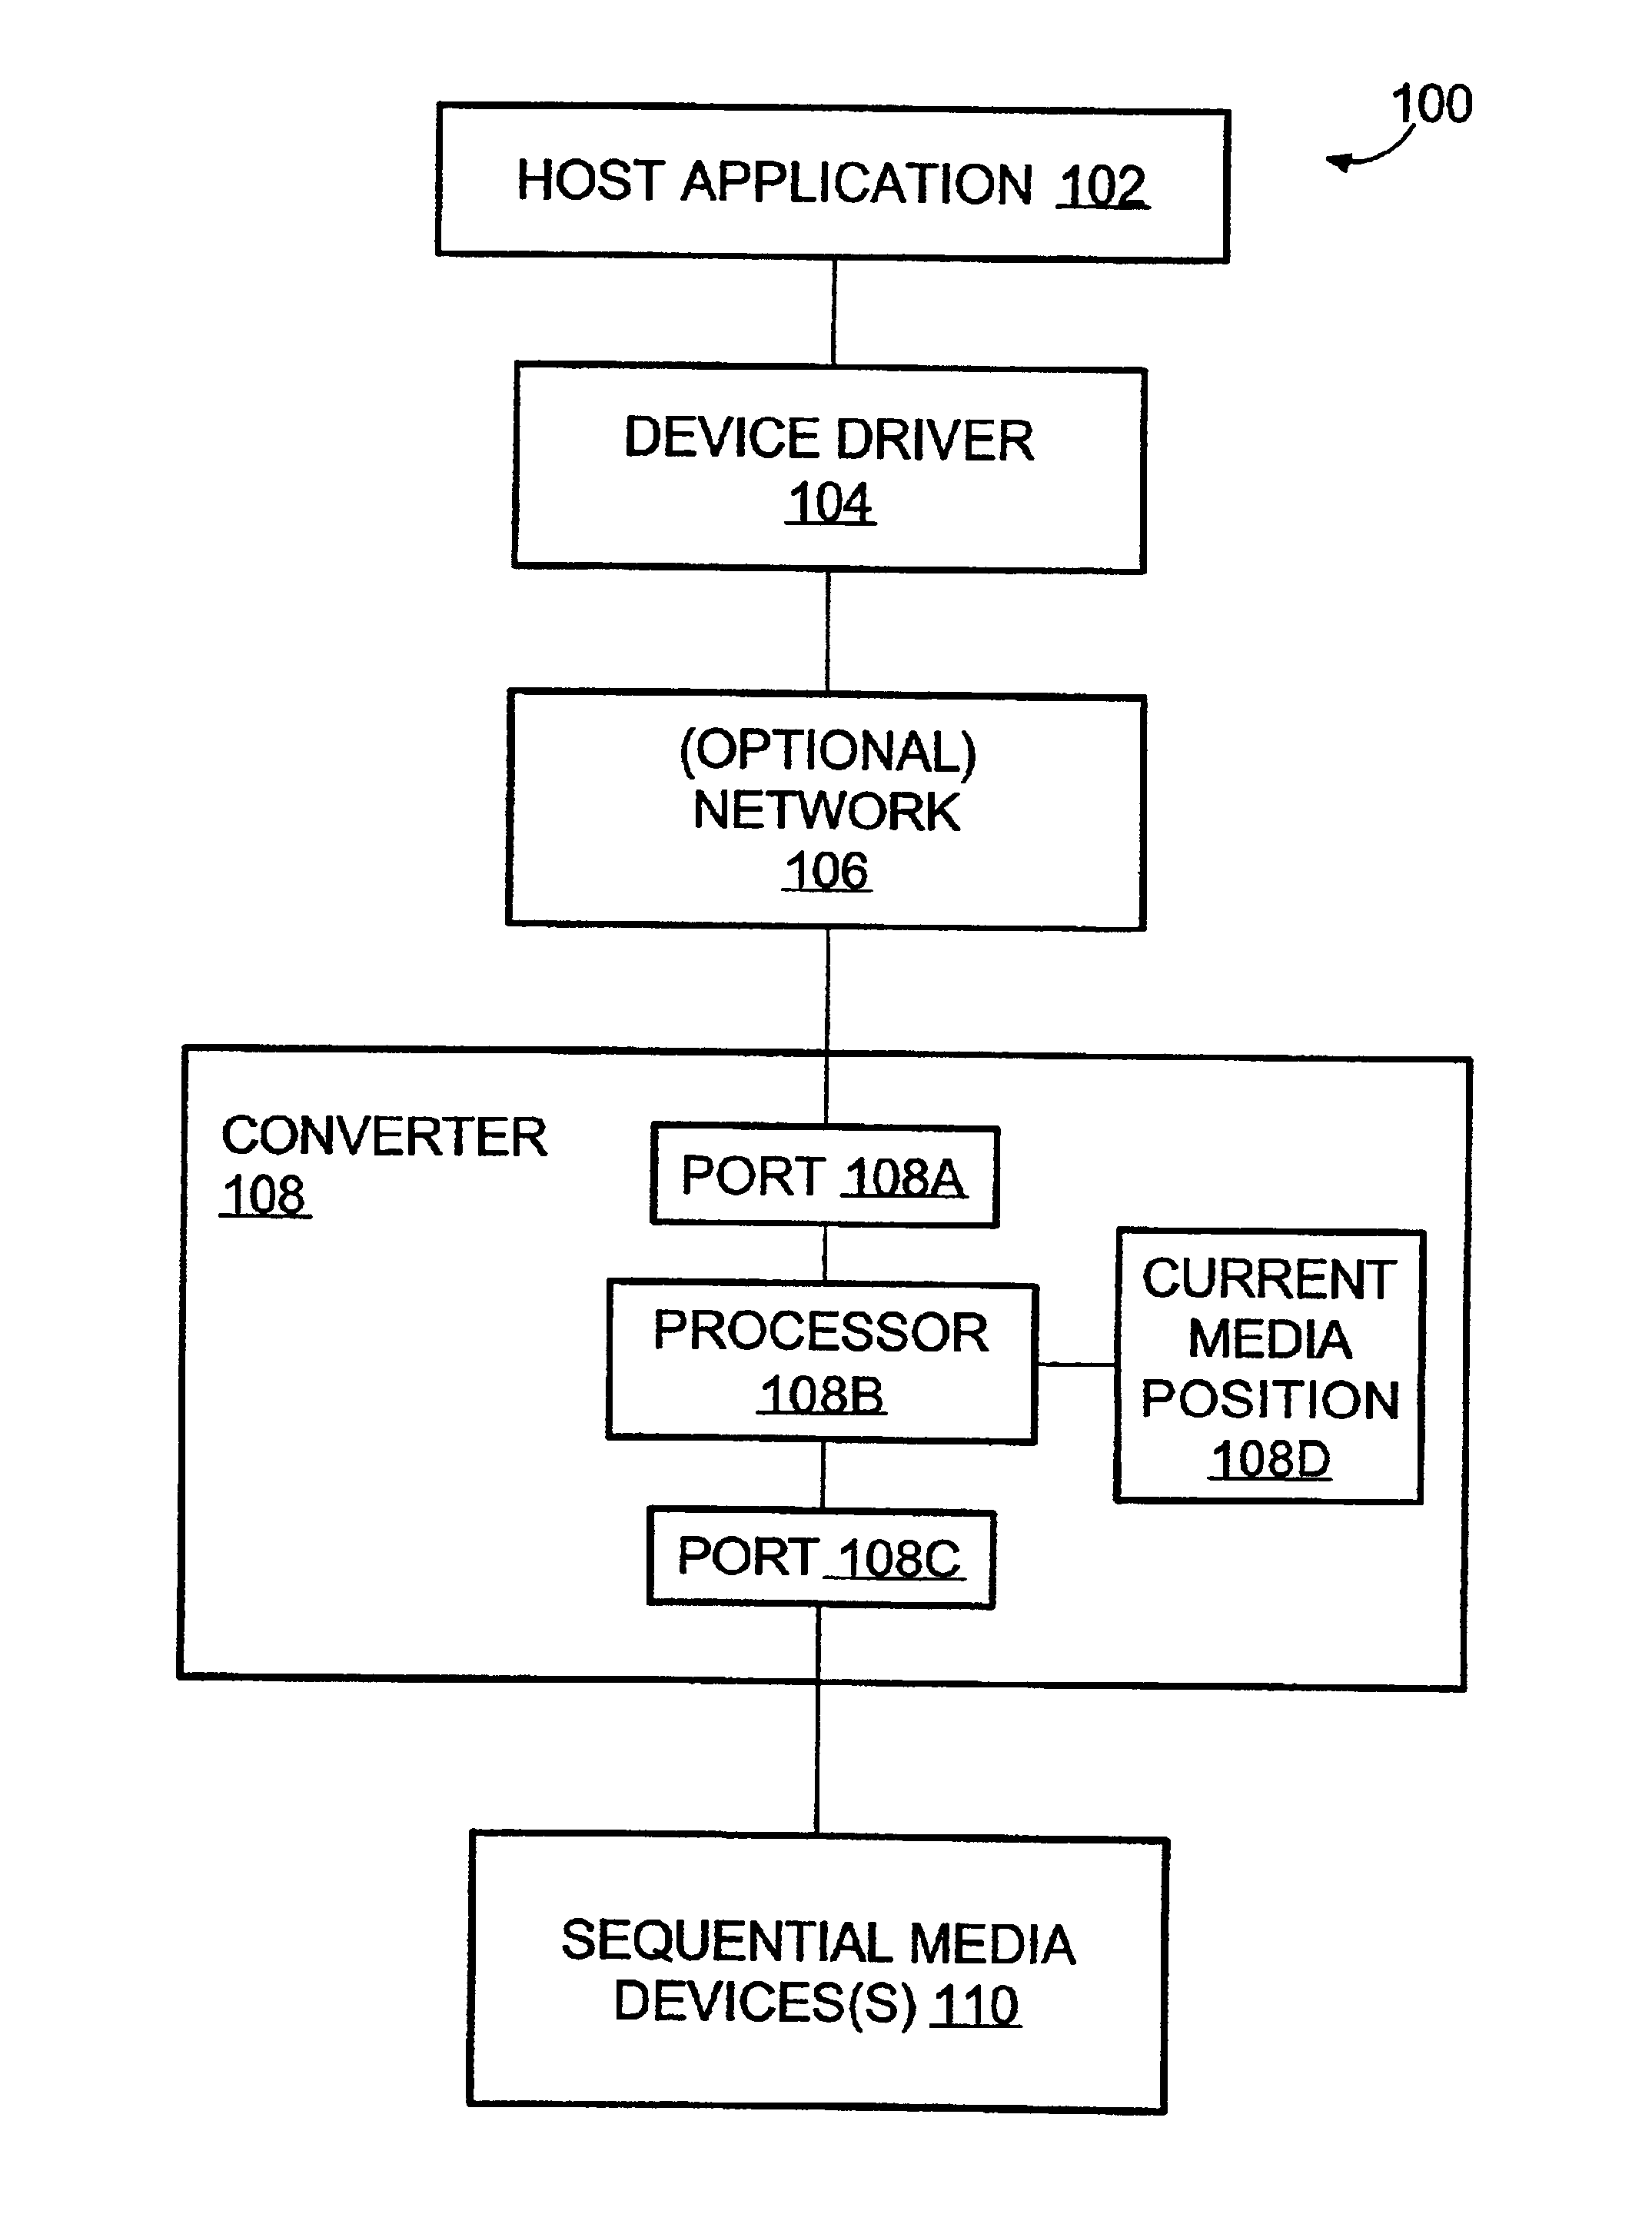 Implicit addressing sequential media drive with intervening converter simulating explicit addressing to host applications